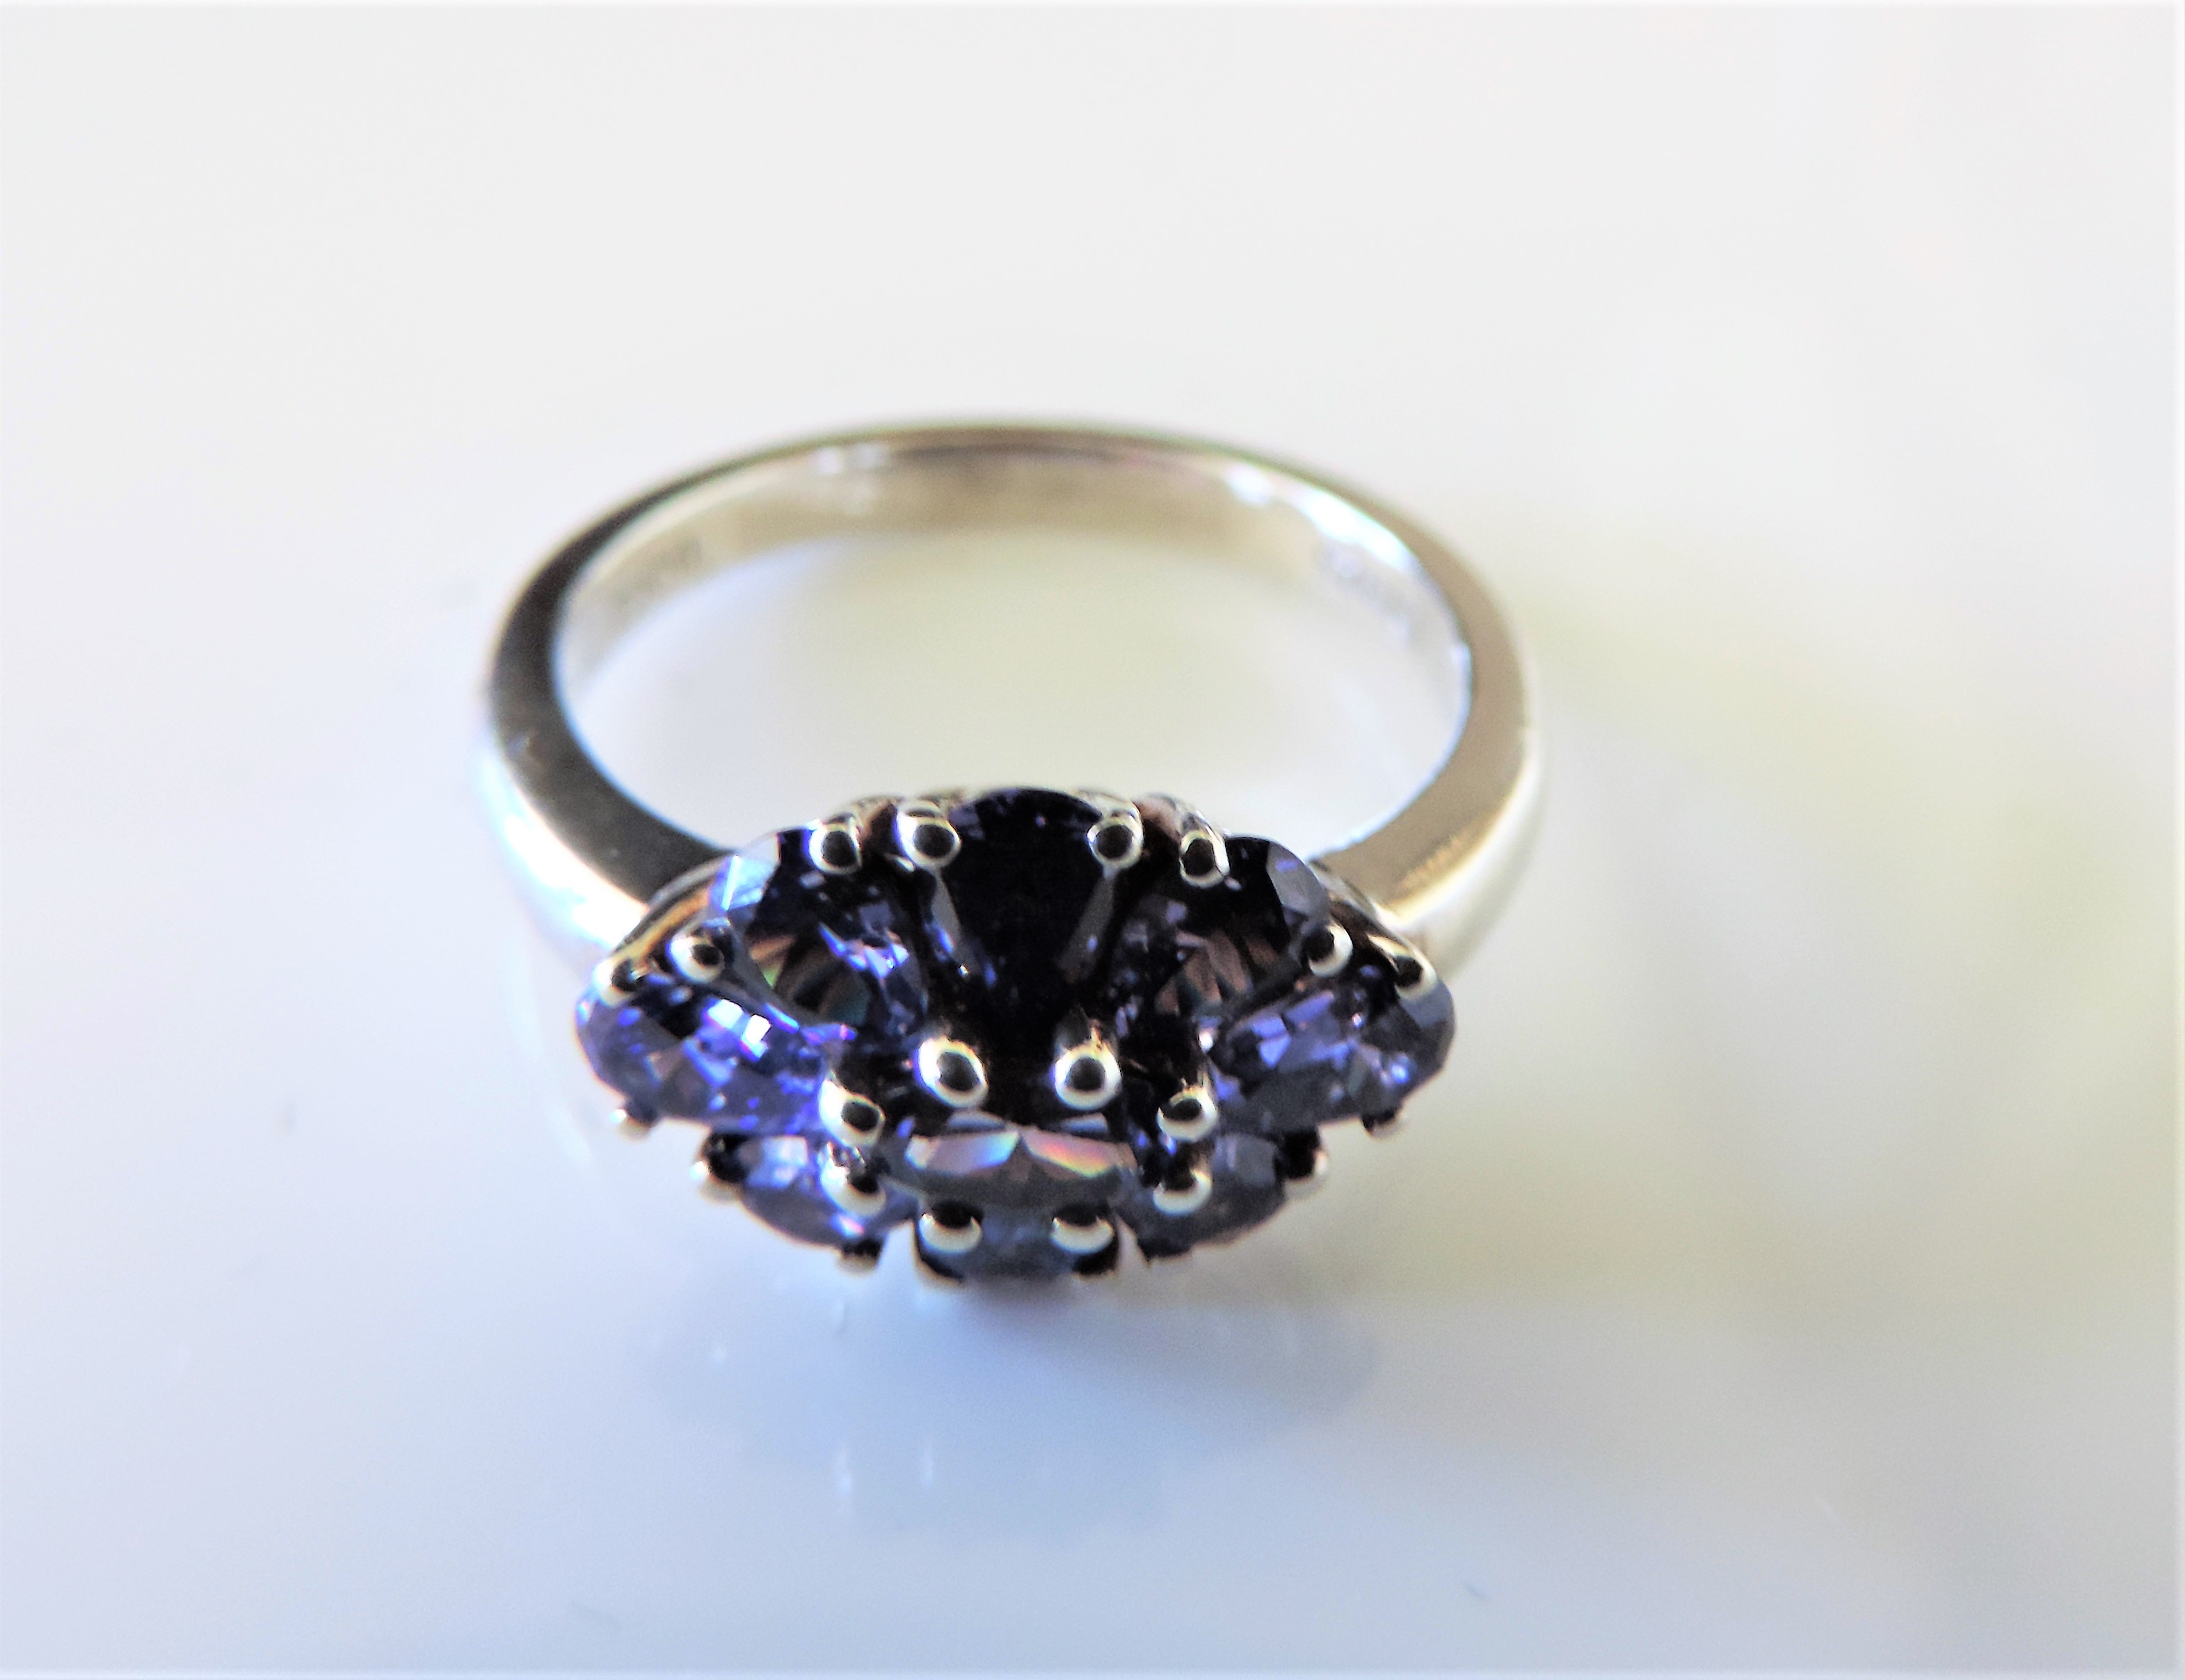 1.8 ct Tanzanite Cluster Ring in Sterling Silver - Image 2 of 4